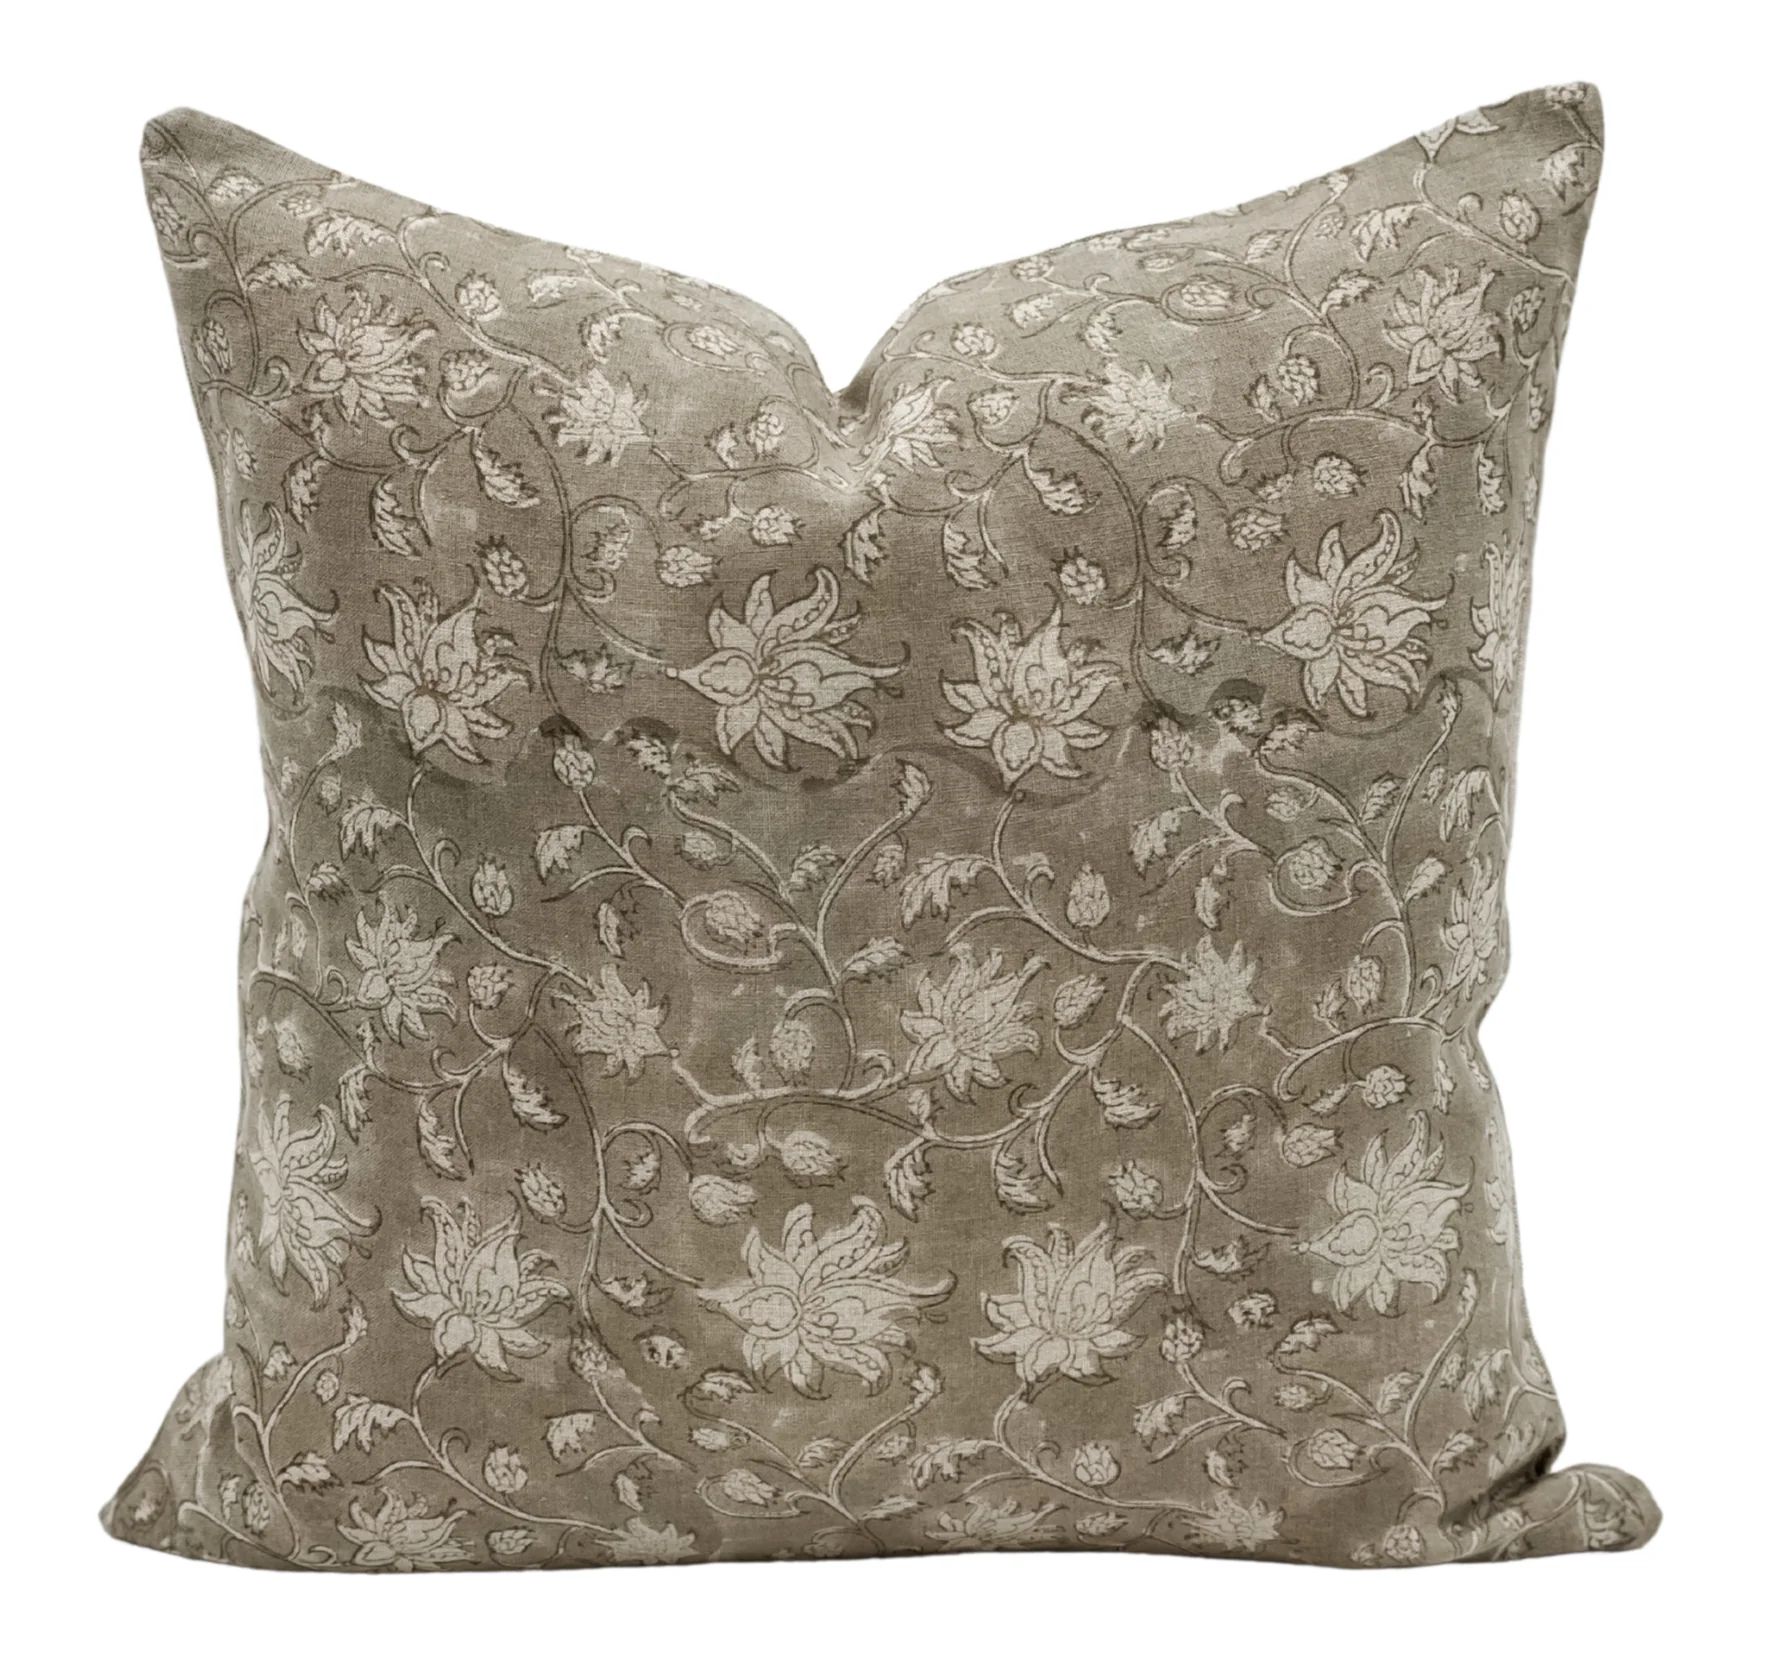 TACOMA IN SOFT BEIGE GREY PILLOW COVER | Krinto